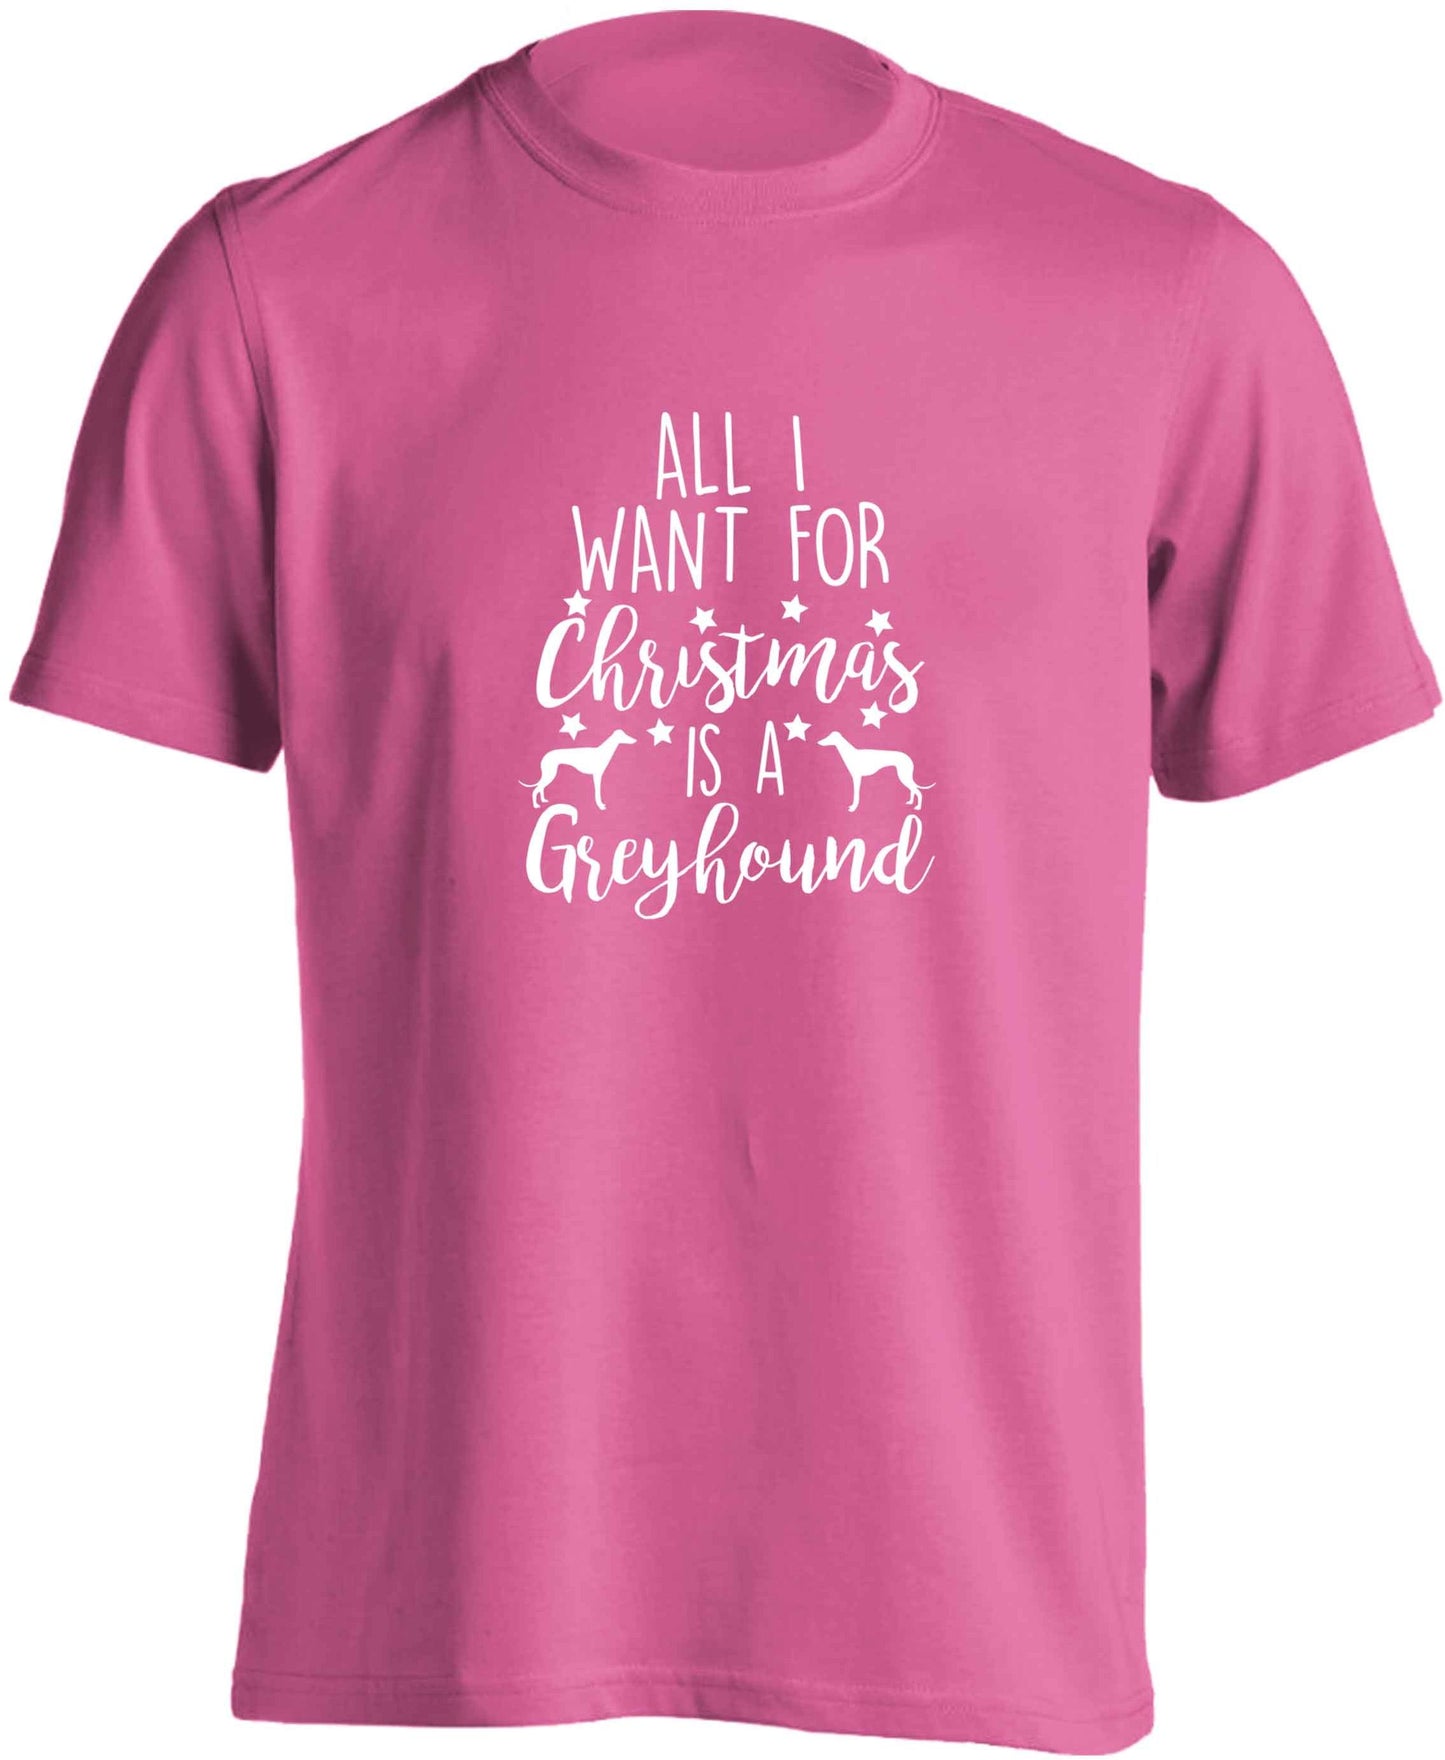 All I want for Christmas is a greyhound adults unisex pink Tshirt 2XL